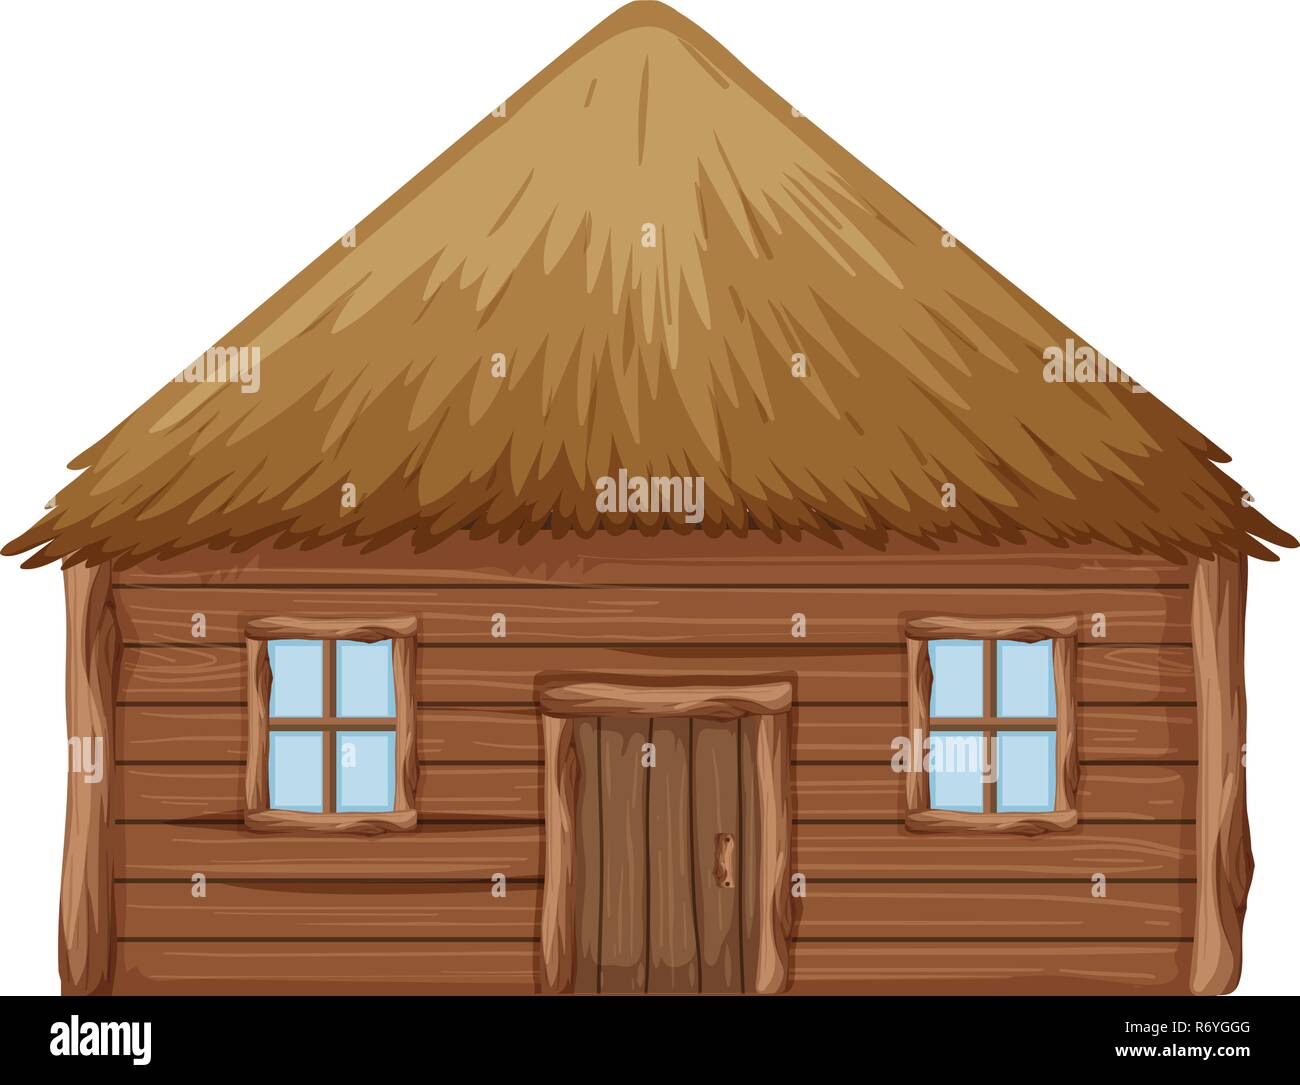 A wooden hut on white background illustration Stock Vector